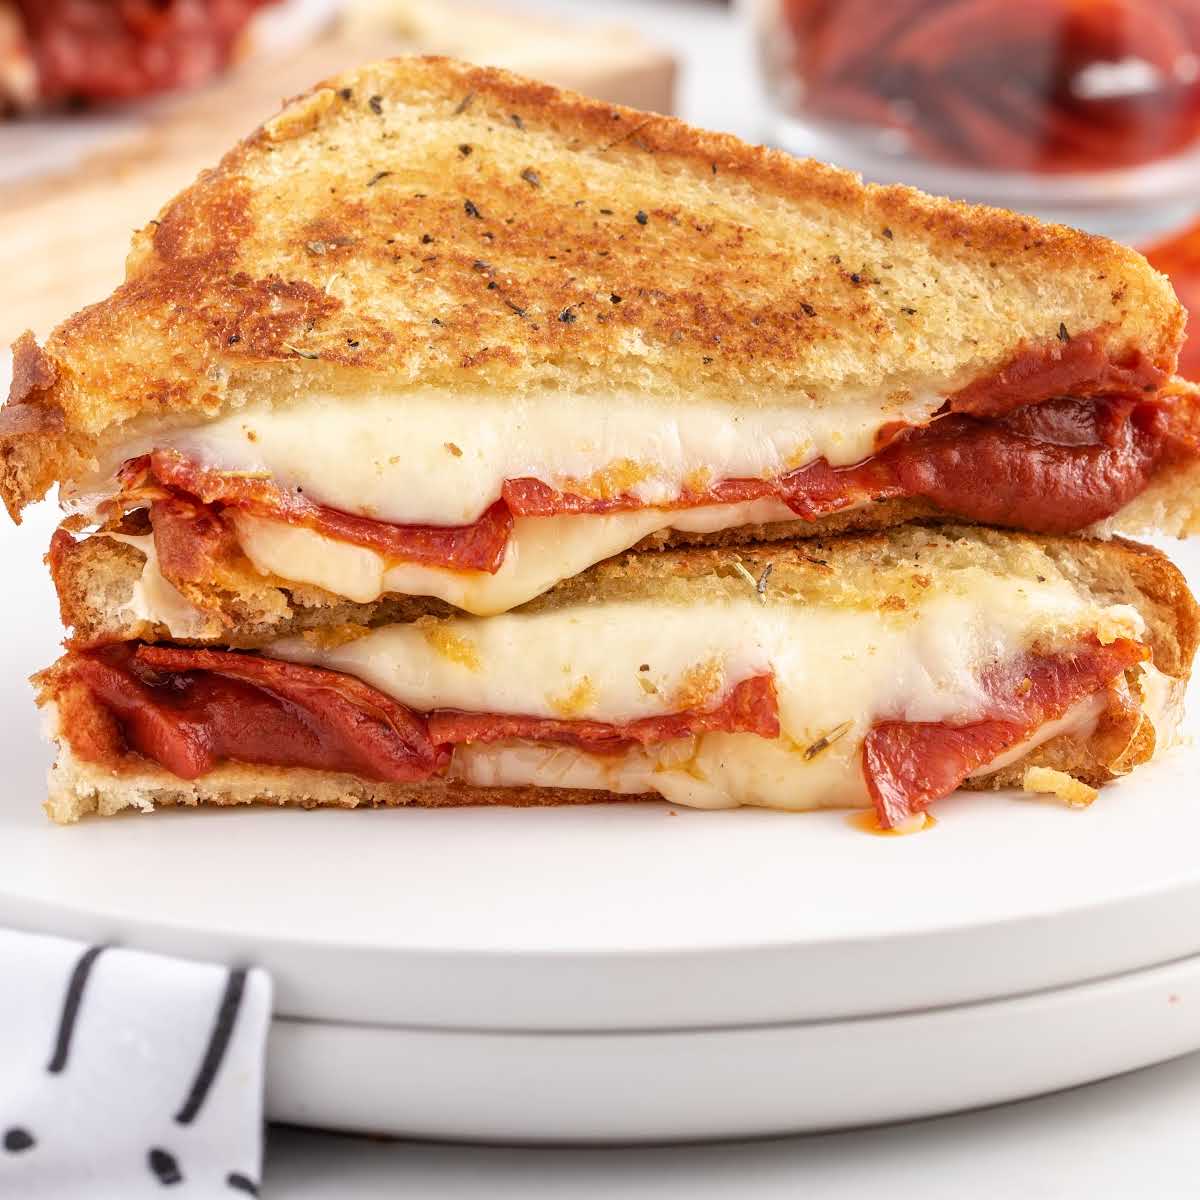 https://spaceshipsandlaserbeams.com/wp-content/uploads/2022/03/pizza-grilled-cheese-recipe-card.jpg